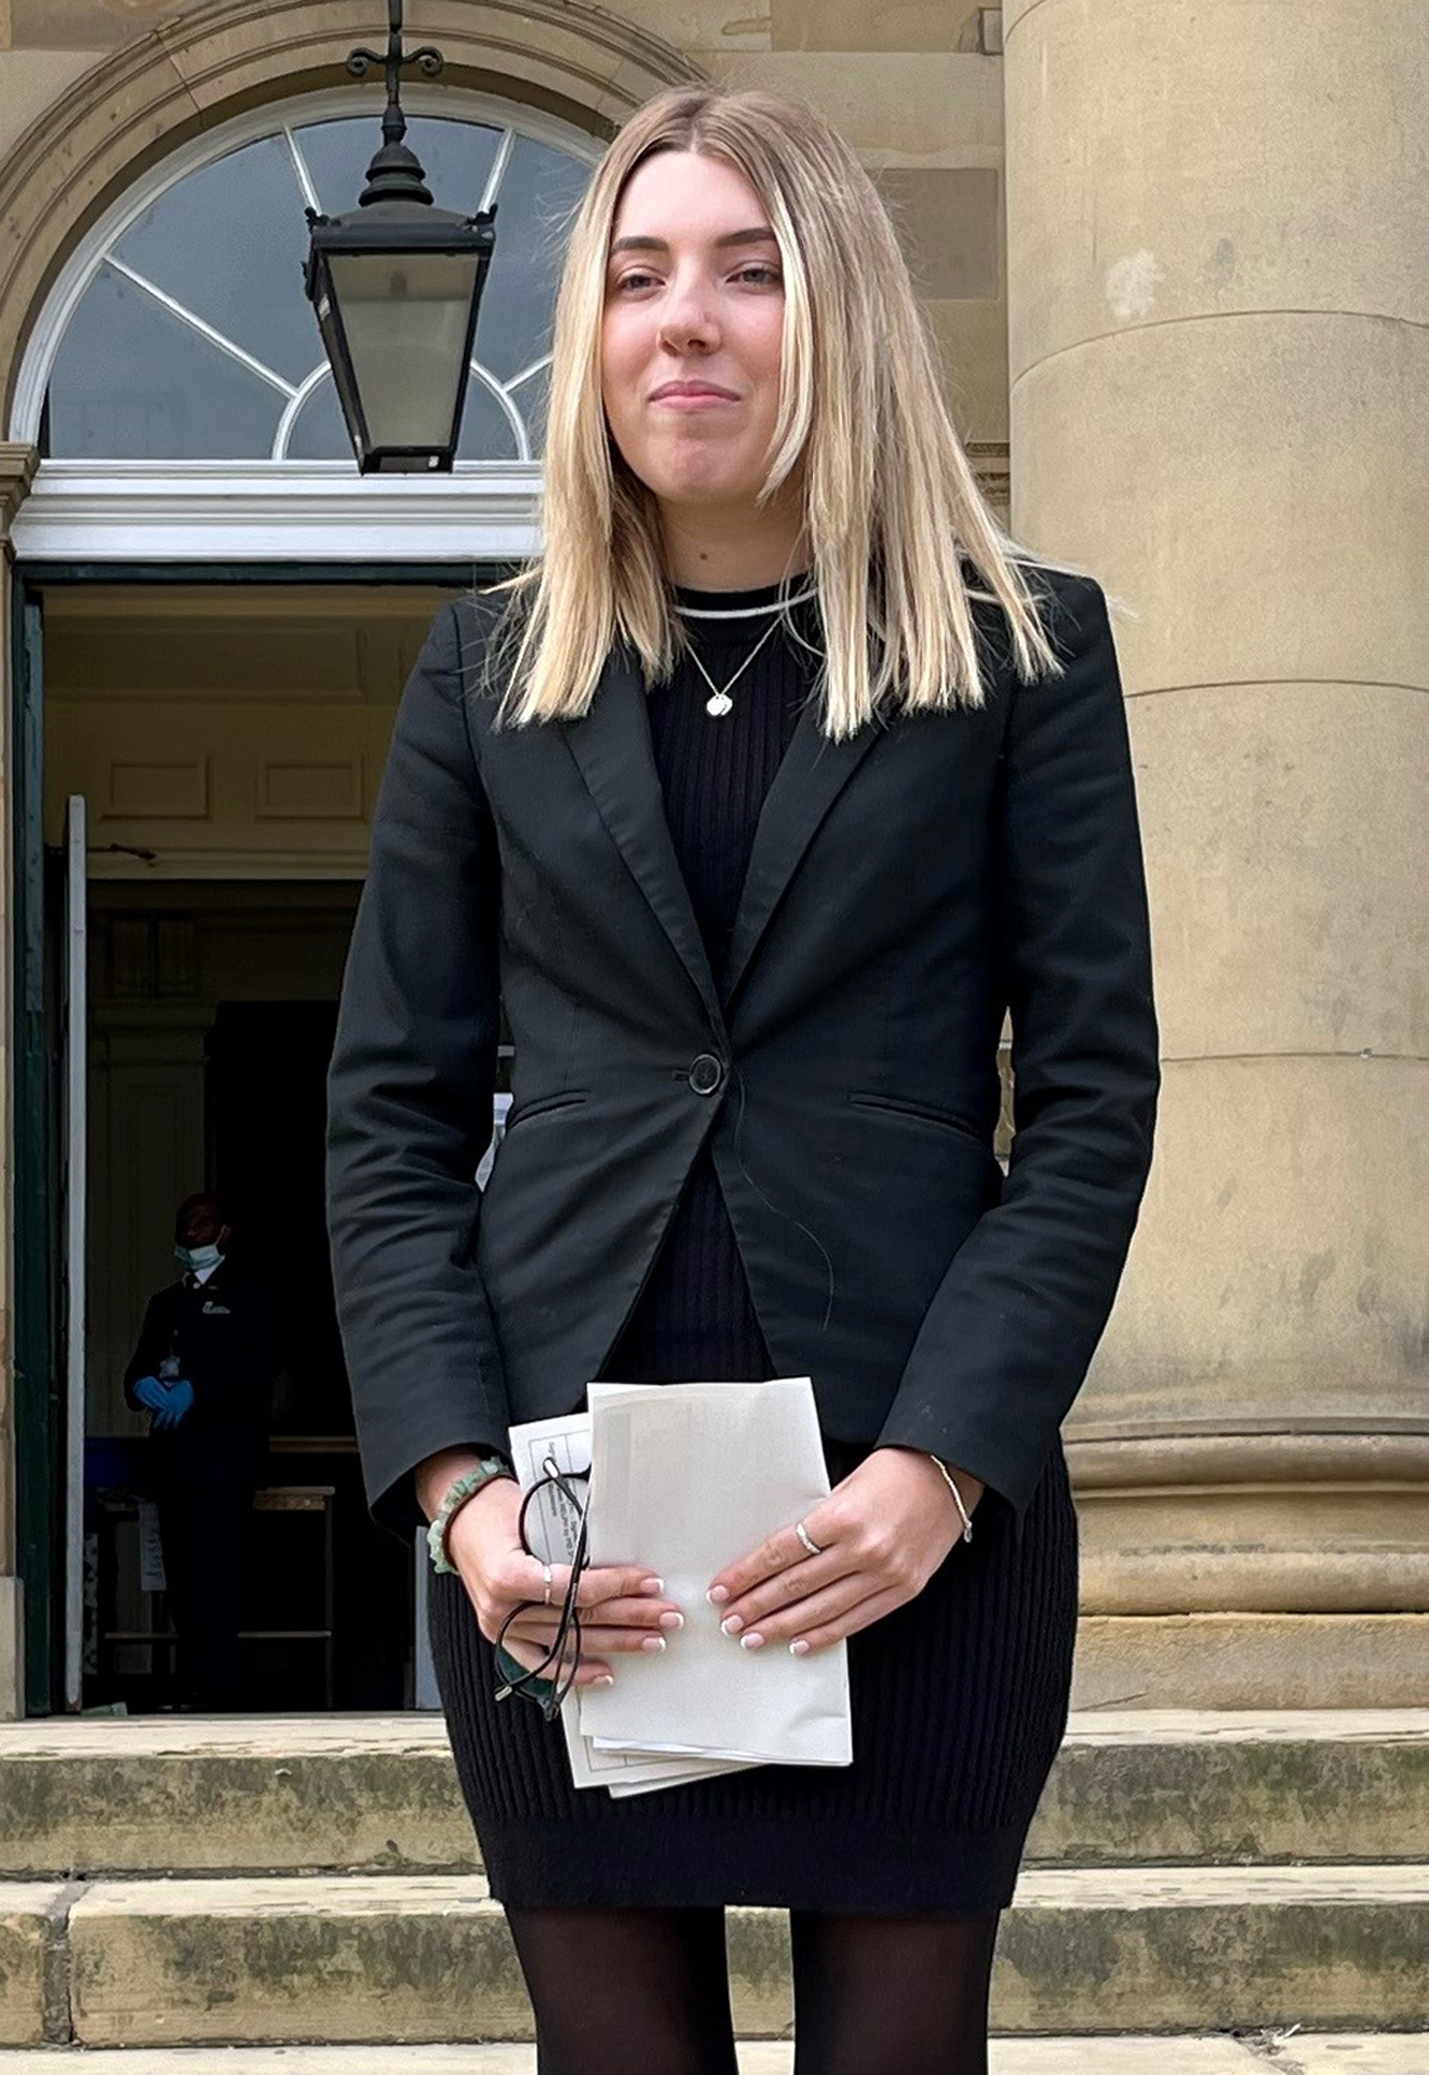 Stalking victim Maisie Relph outside York Crown Court where her former driving instructor Graham Mansie was jailed for 20 months for breaching a restraining order.: Tom Wilkinson/PA Wire.